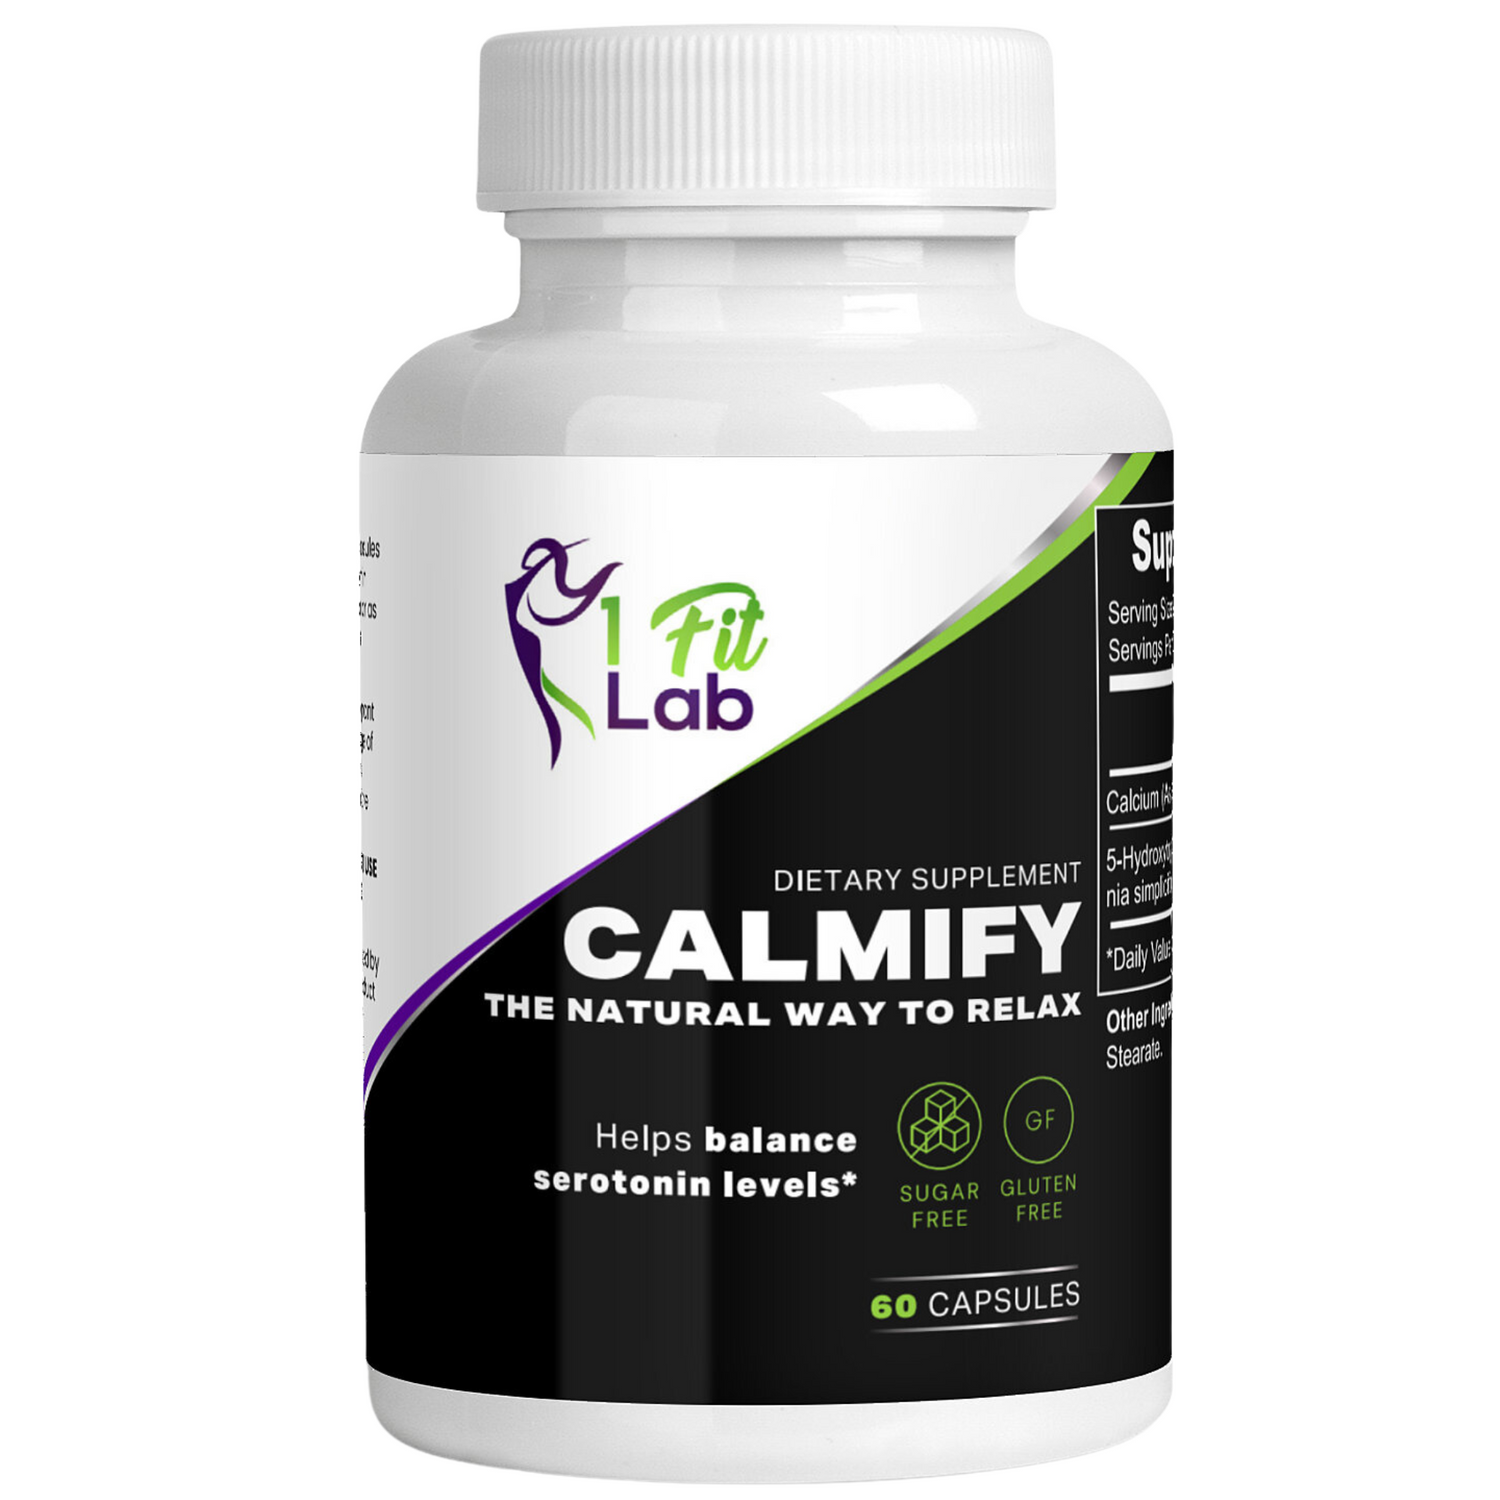 Bottle of Calmify Natural 5HTP for Stress Relief and Sleep Support Supplement